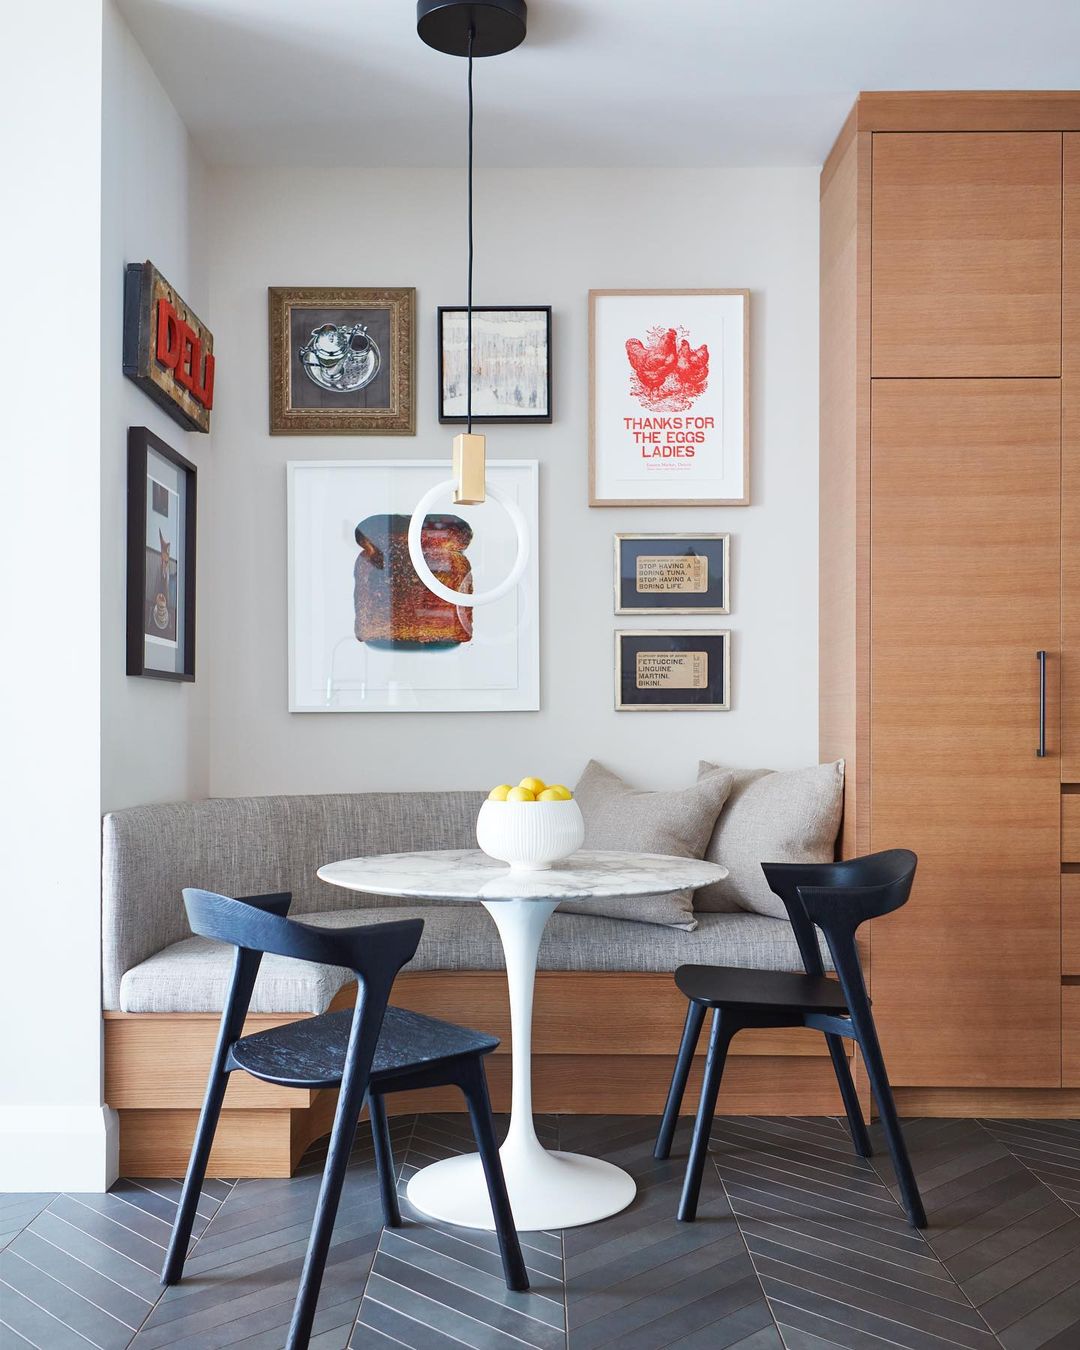 10 Inspiring Banquette Seating Ideas for Small Dining Areas